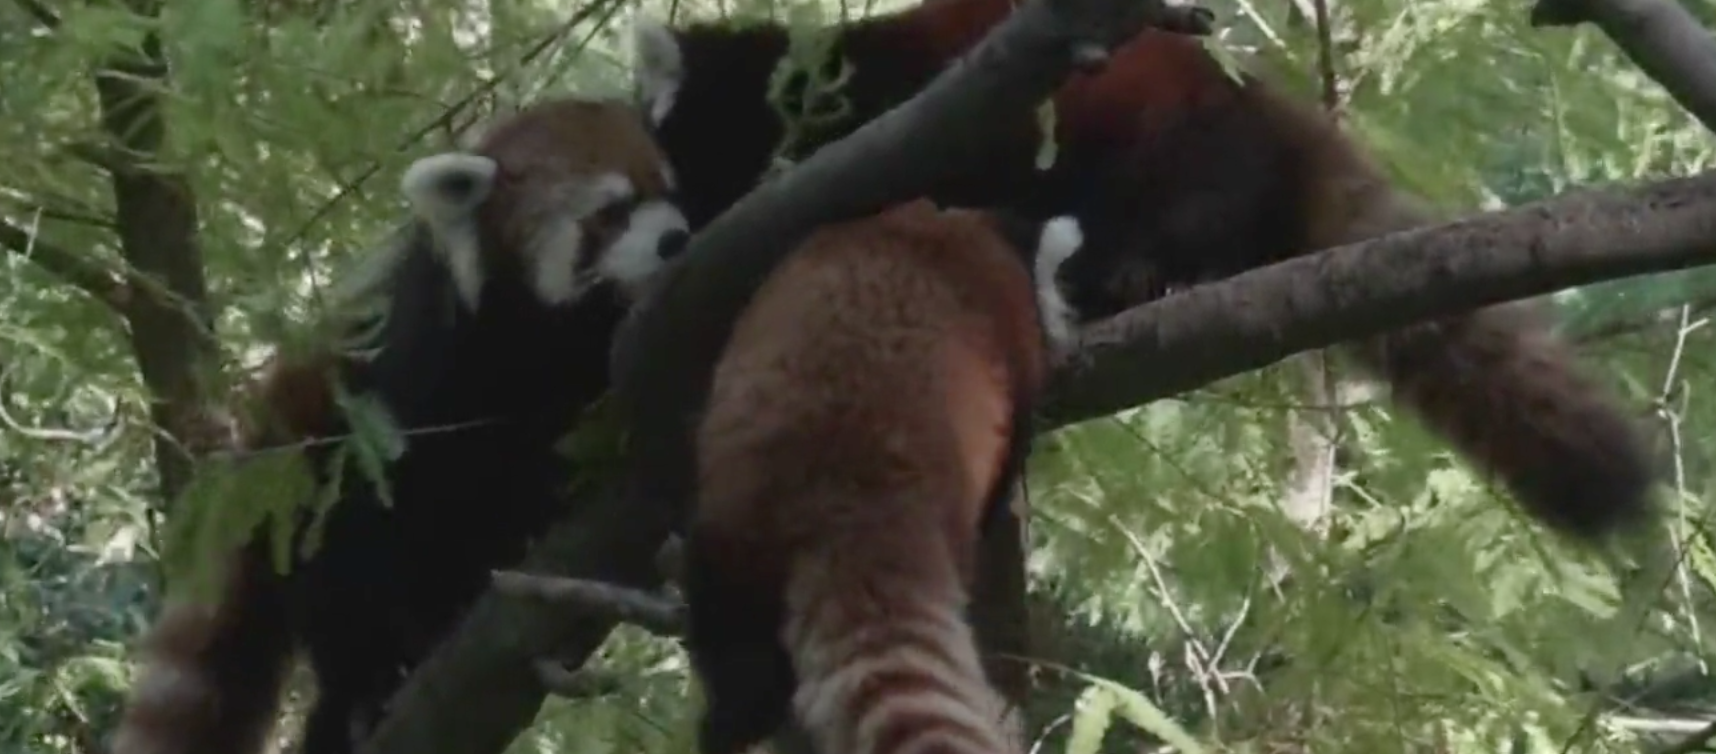 Briefly Noted: Red Panda Cubs Debut at Prospect Park Zoo, Churro Lady Starts Fundraiser, & More